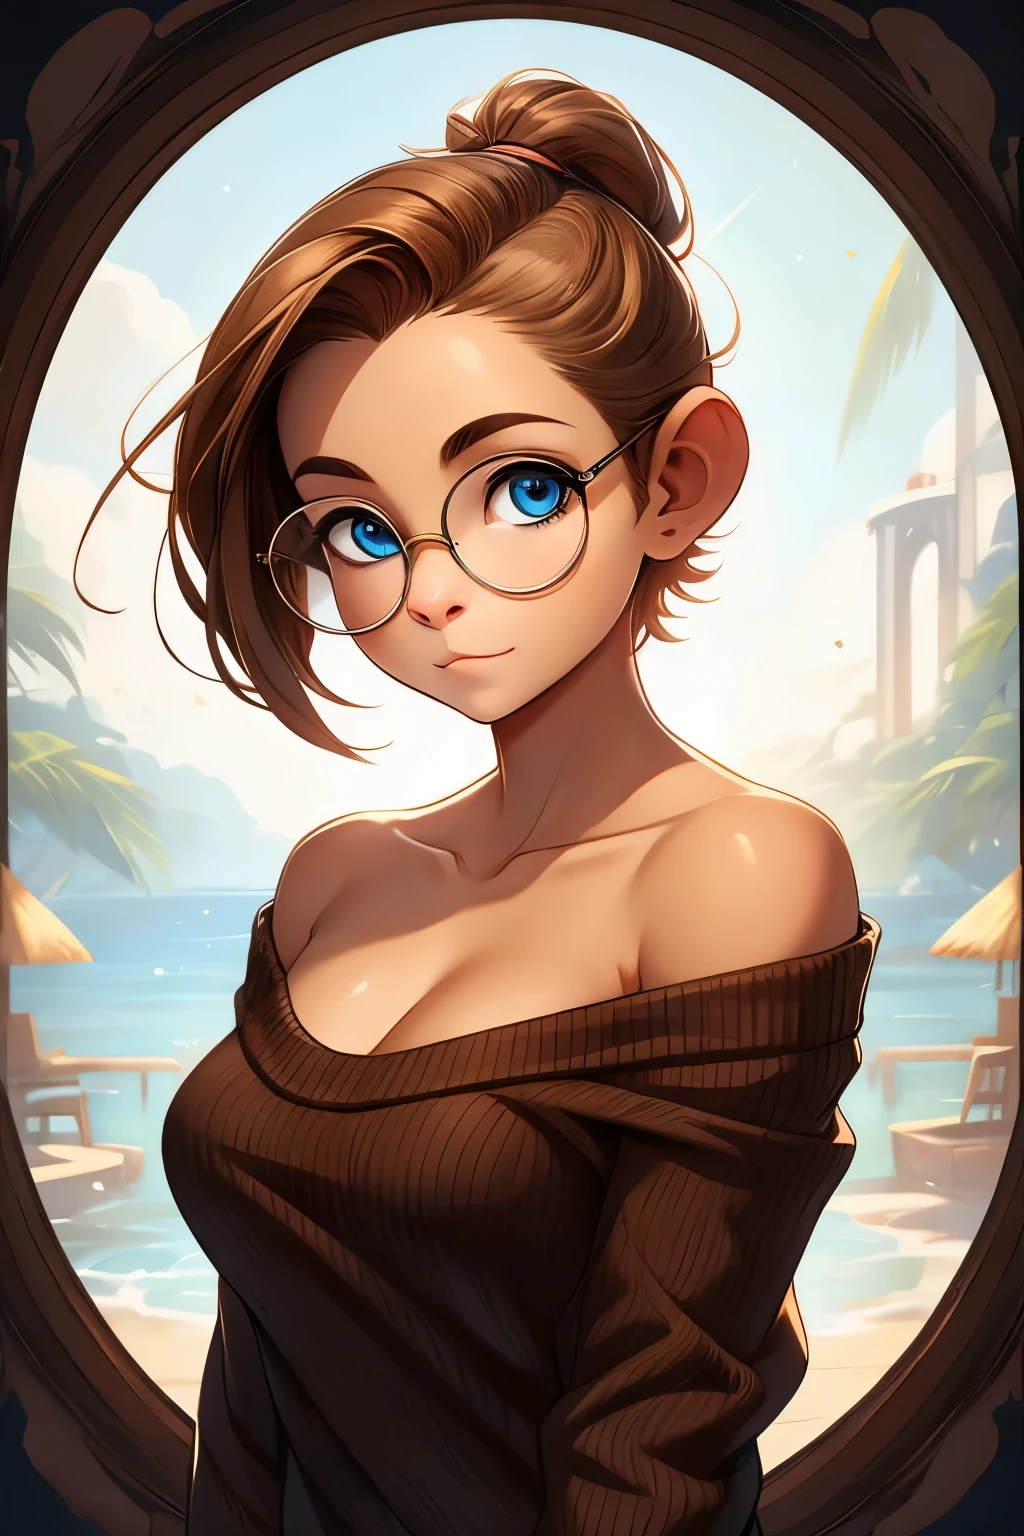 Female monkey, furry, light brown fur, side swept hair, half shaved head, short hair, monkey ears, busty chest, hourglass figure, off shoulder sweater, light blue eyes, circular framed glasses, long monkey tail, beautiful, correct anatomy, no human features